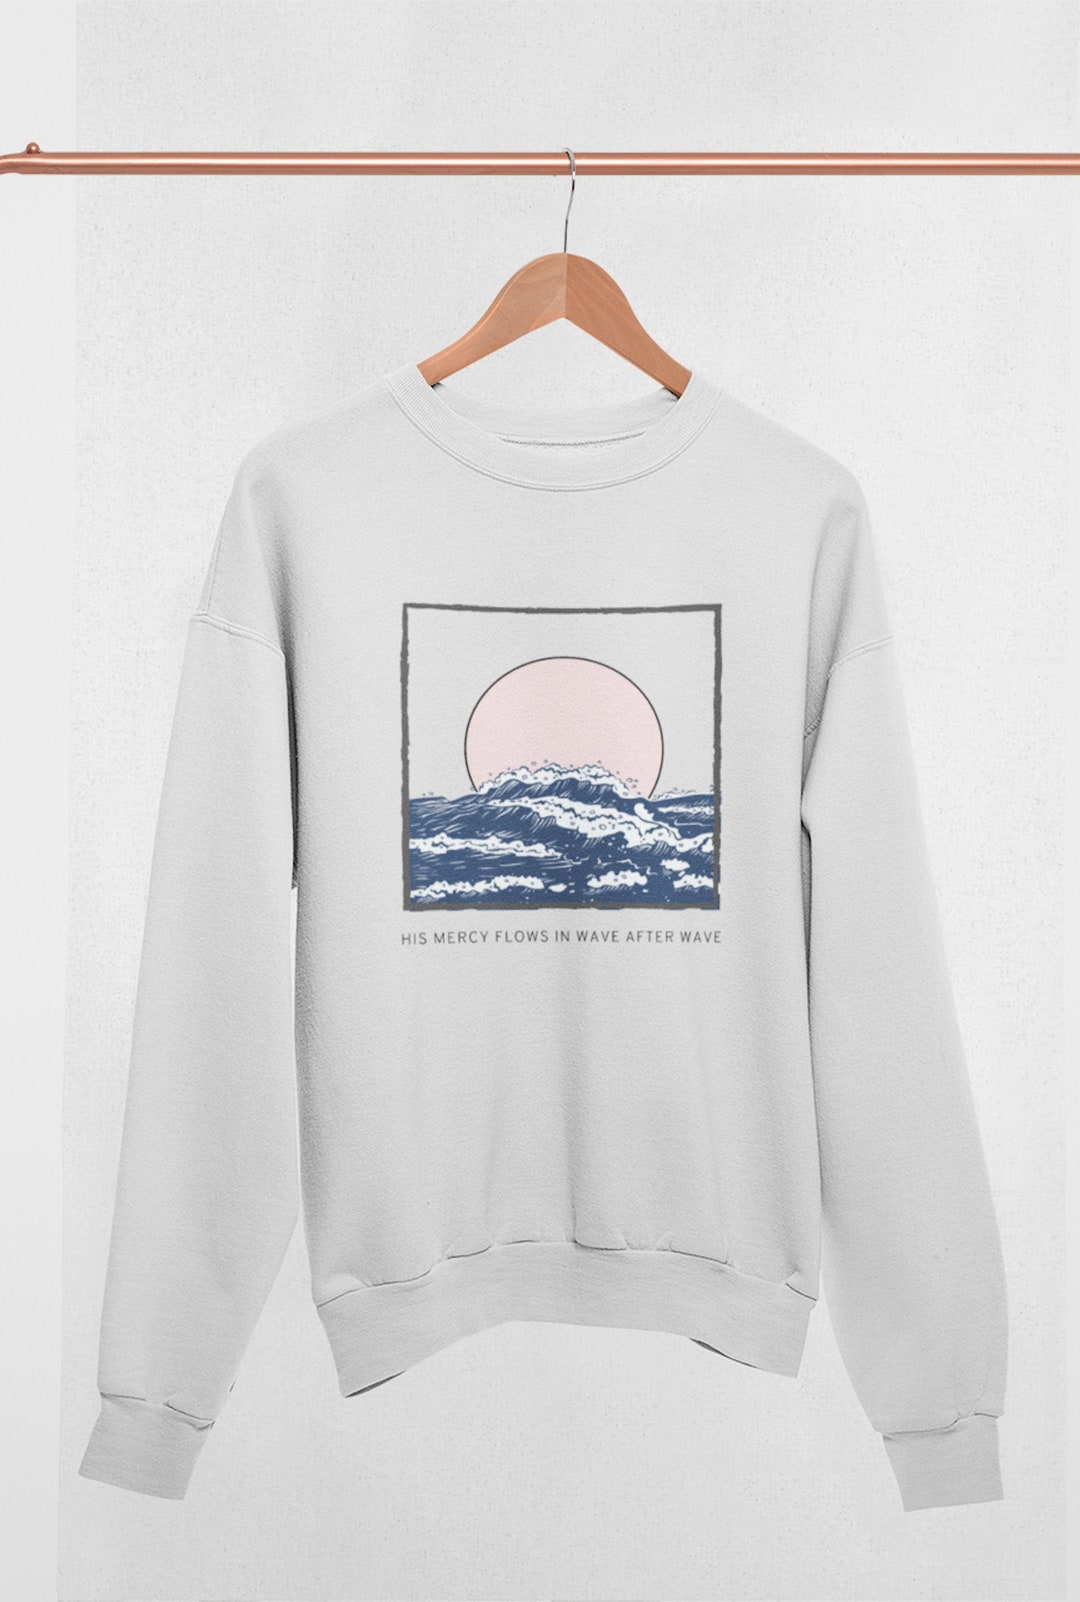 His Mercy Flows Wave After Wave Christian Sweatshirt, Aesthetic ...